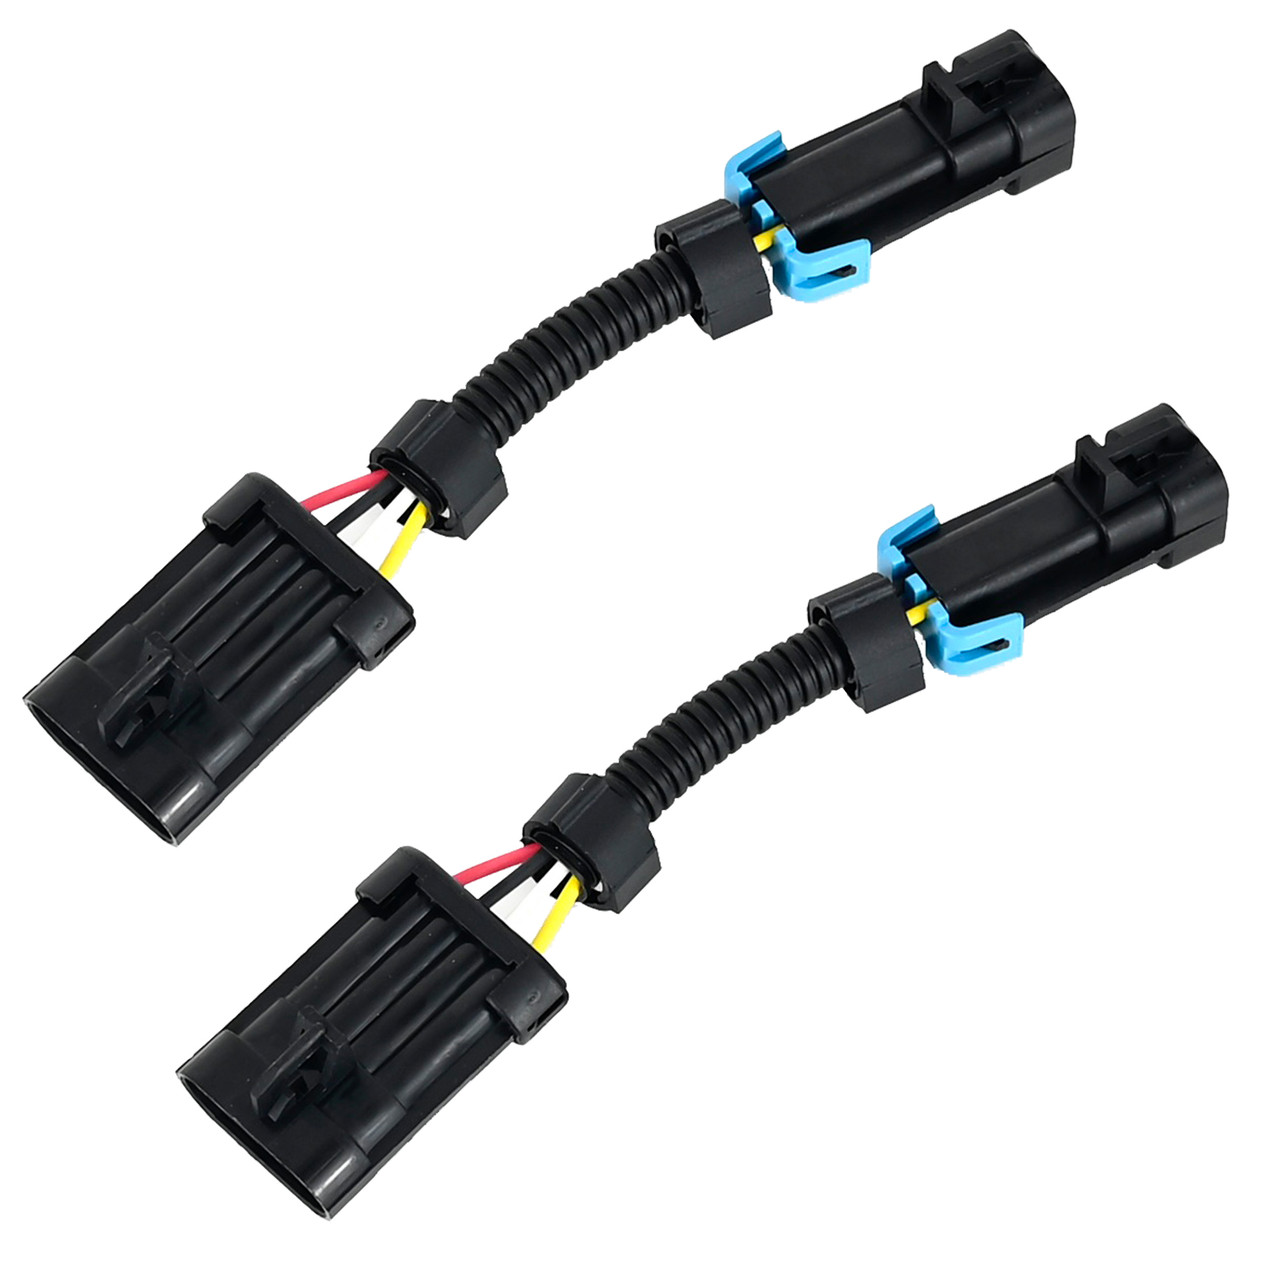 O2 Sensor Adapter LS1 LS6 Corvette C5 Rear to Front Oxygen Sensor 4 pin Black Square Connector to the Flat 4 pin Pair (Qty2)